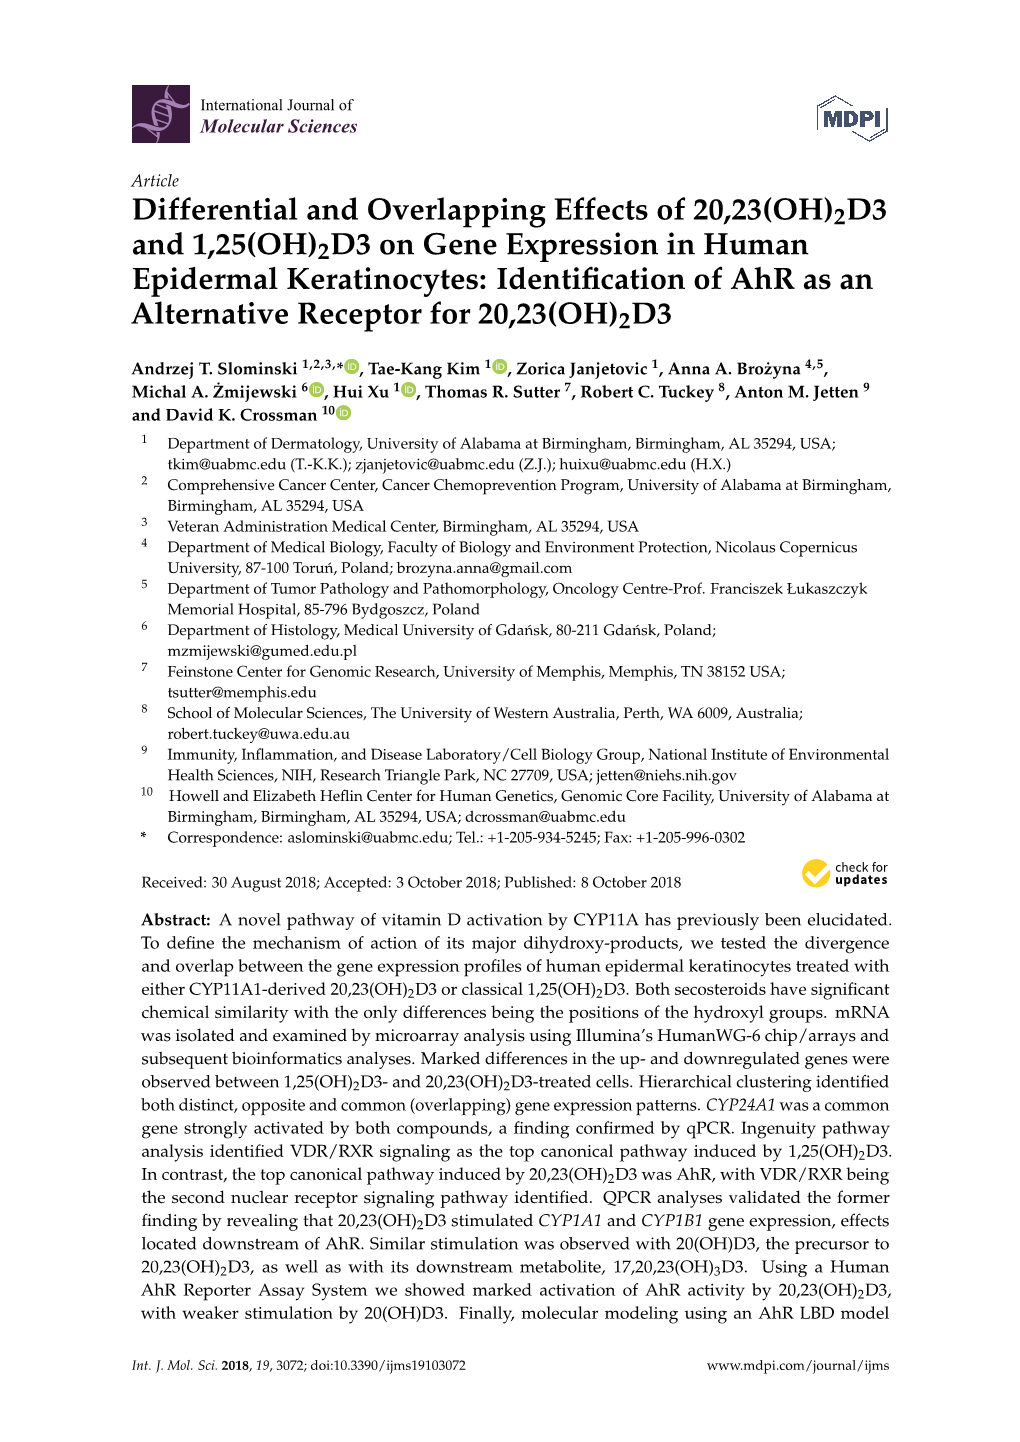 2D3 and 1,25(OH)2D3 on Gene Expression in Human Epidermal Keratinocytes: Identiﬁcation of Ahr As an Alternative Receptor for 20,23(OH)2D3